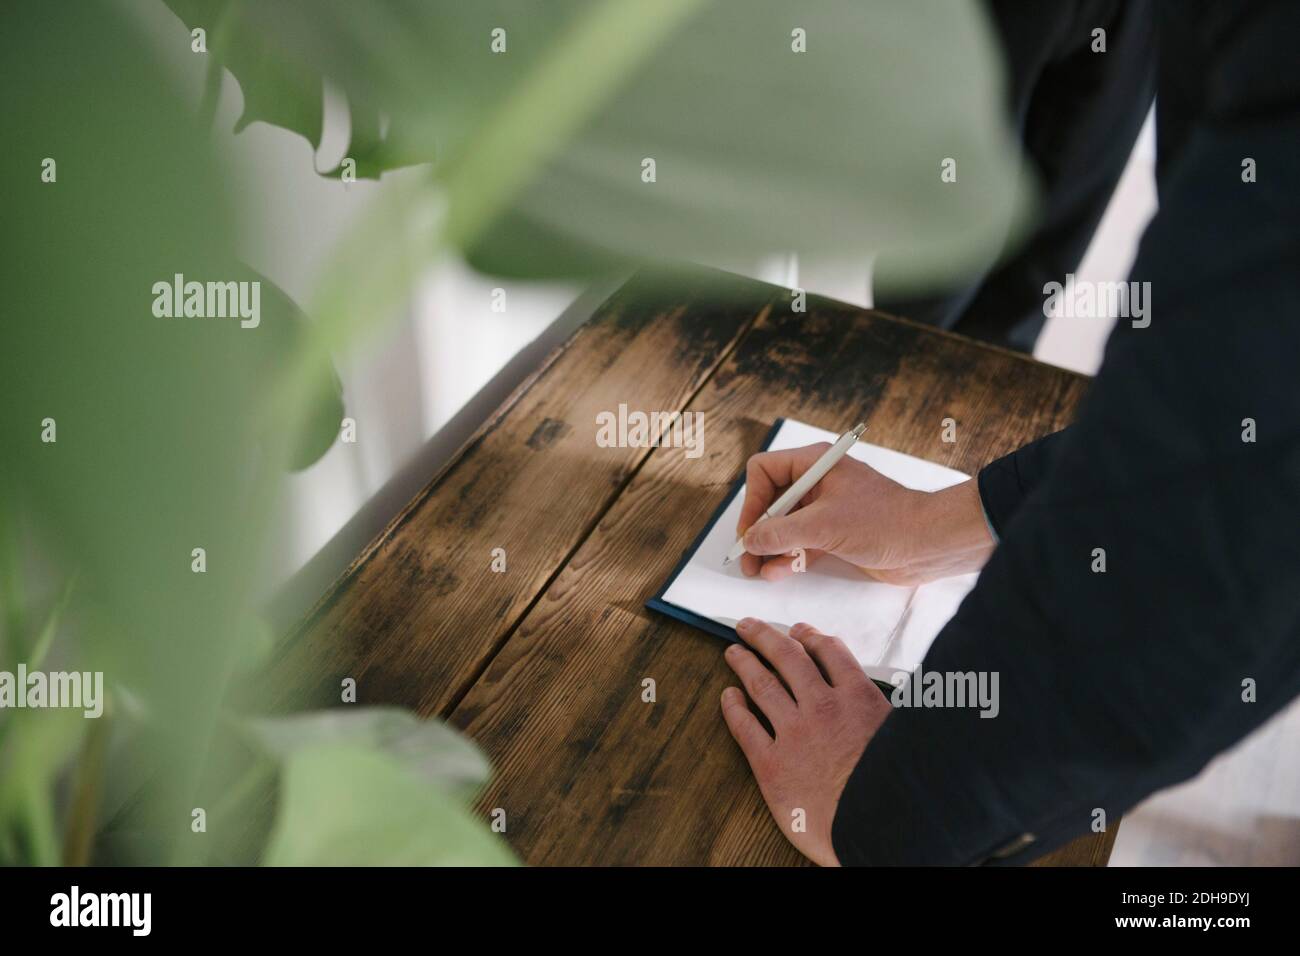 High angle view of man writing on document at home Stock Photo